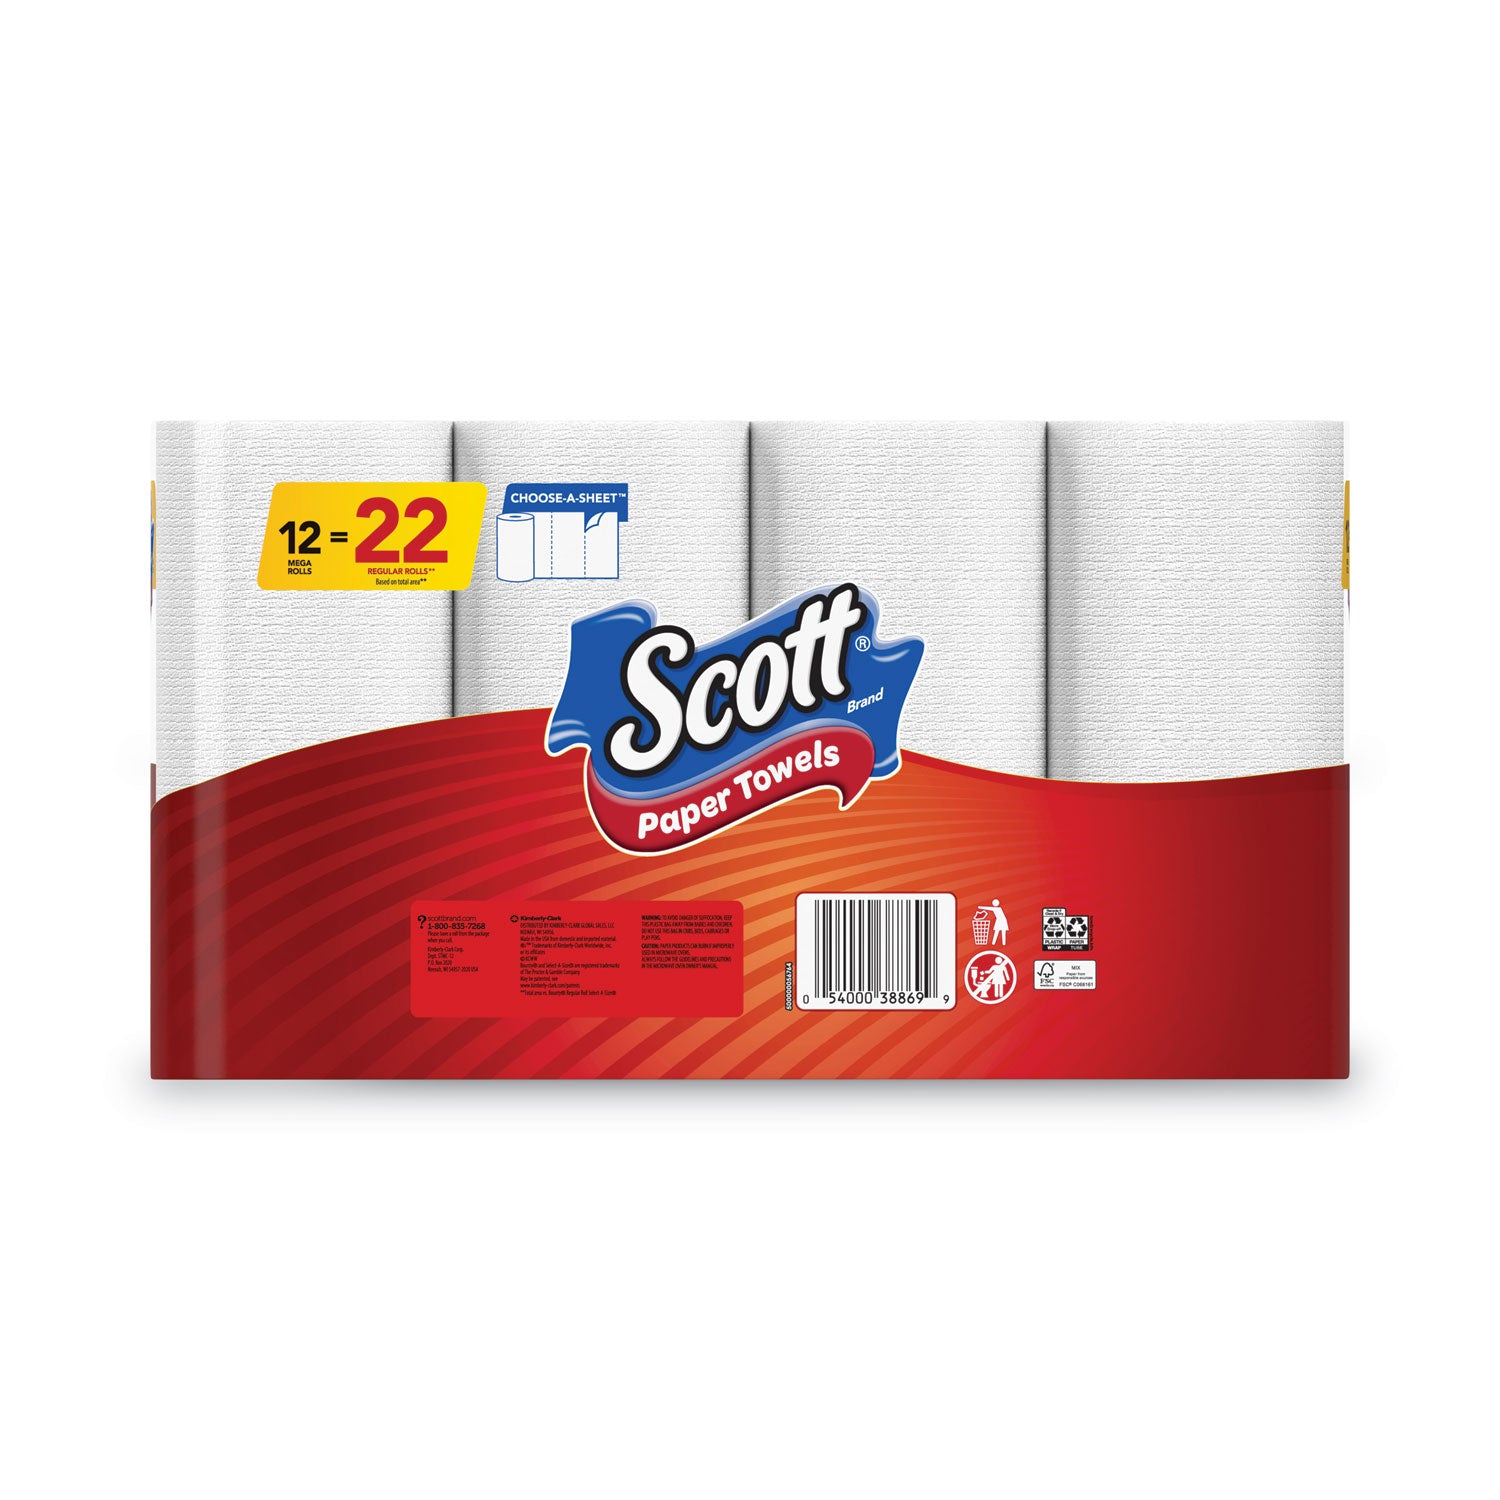 choose-a-sheet-mega-kitchen-roll-paper-towels-white-1-ply-65-x-11-102-sheets-roll-12-rolls-pack_kcc38869 - 5